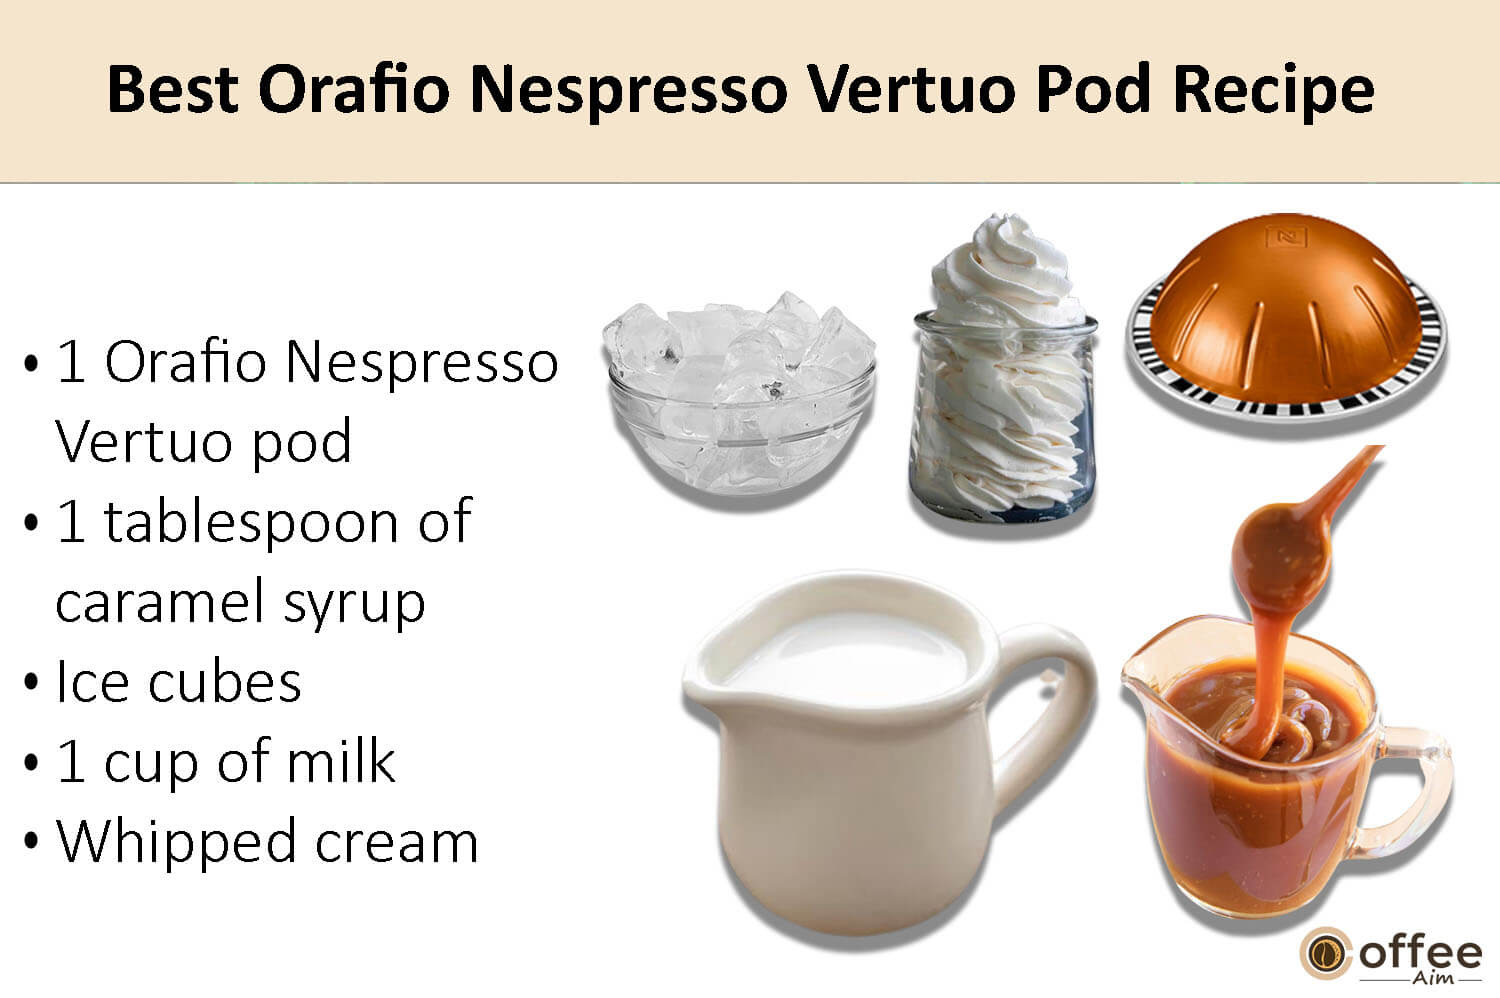 In this image, I elucidate the components that comprise the finest Orafio Nespresso Vertuo coffee pod.